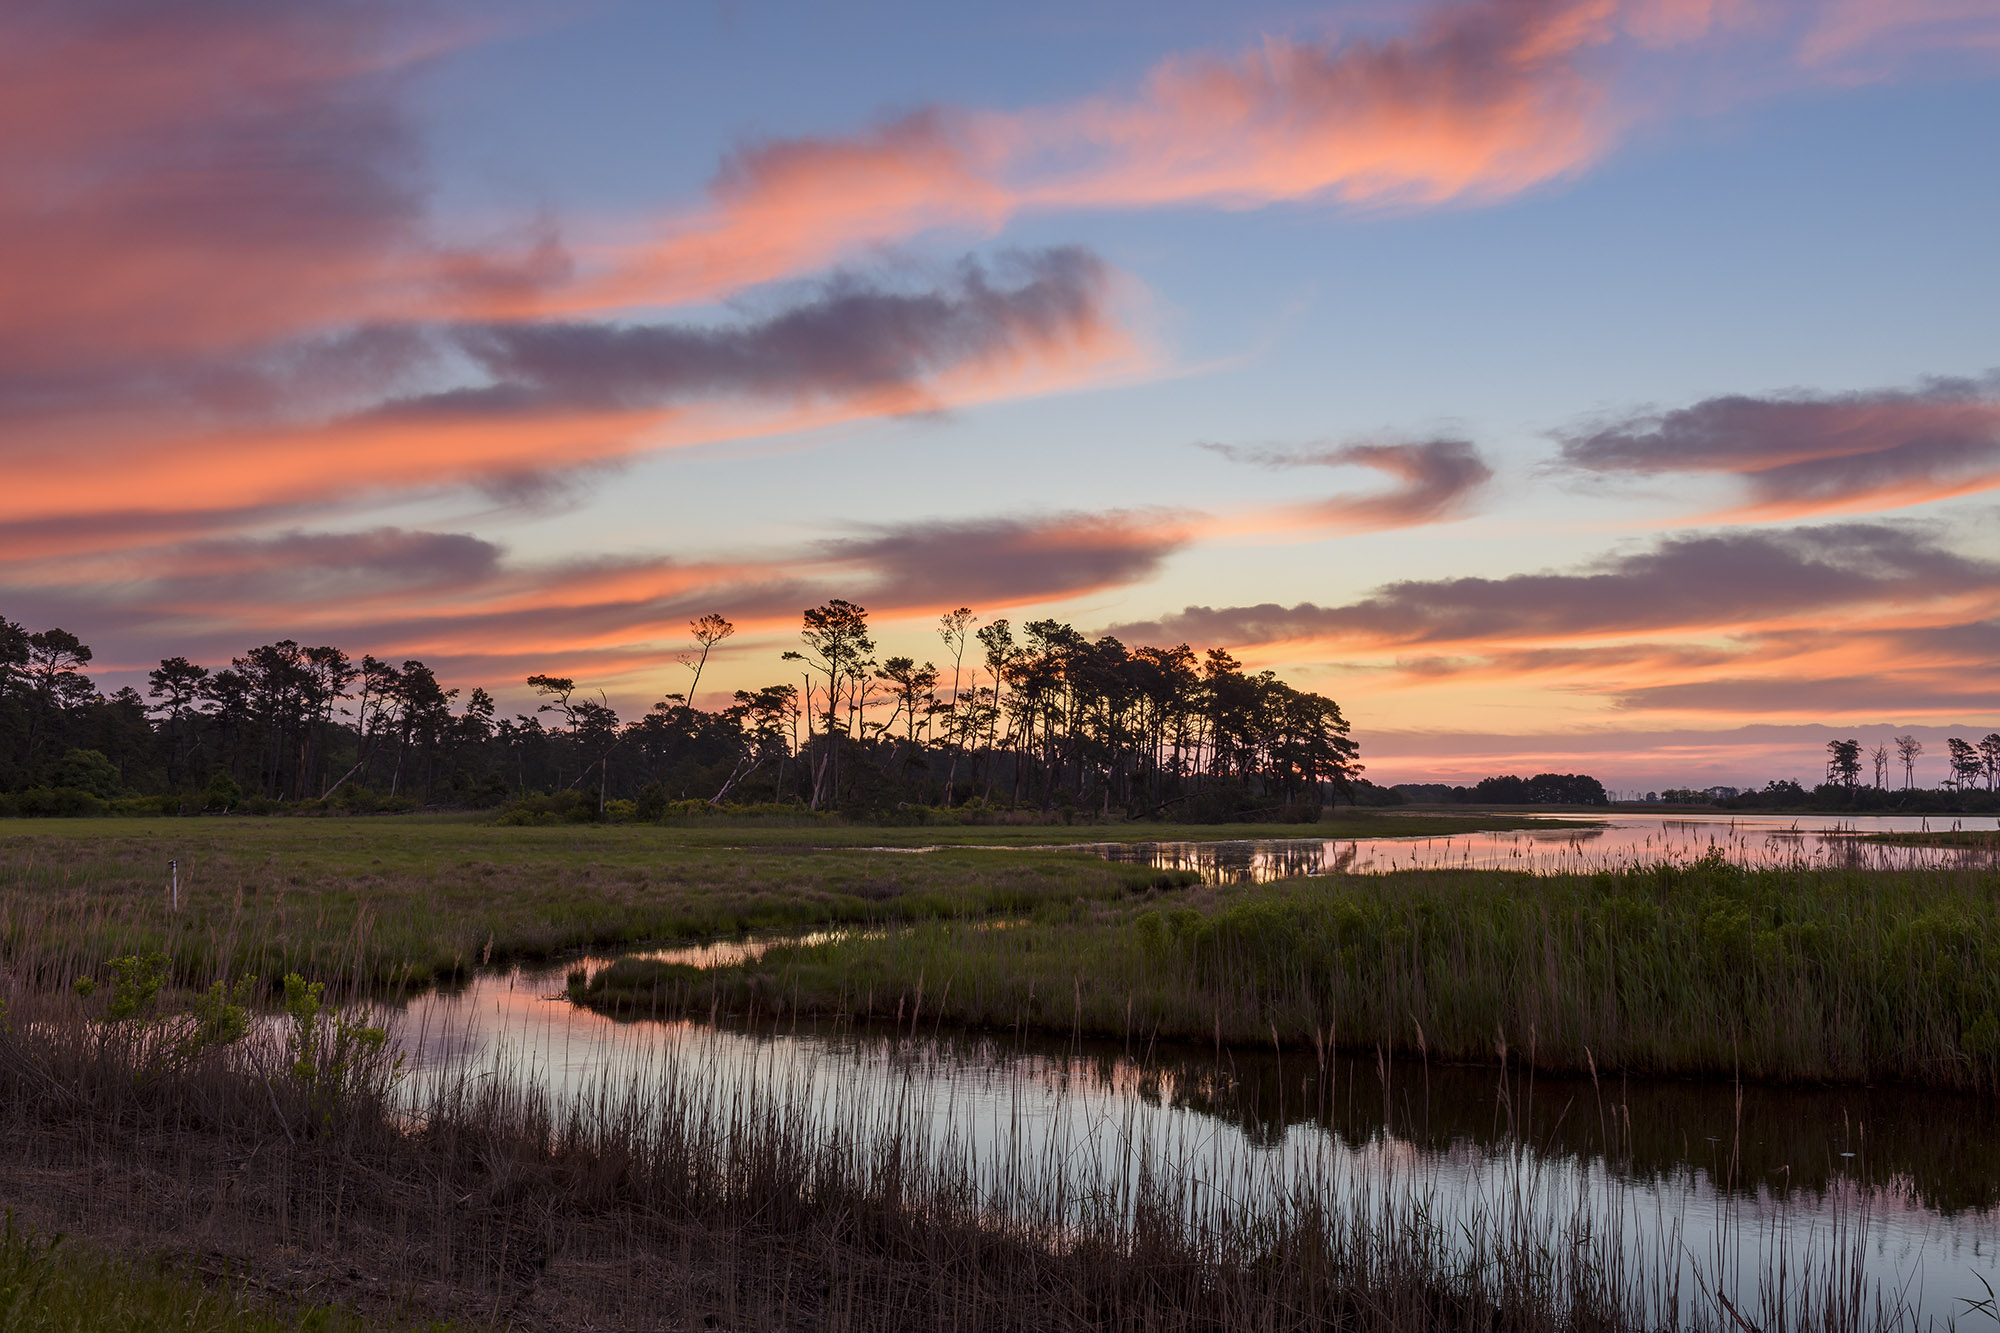 Landscape view of Virginias Wetlands with a pink, orange, yellow, and blue sunset that reflects on the water between the tall grass that grows.